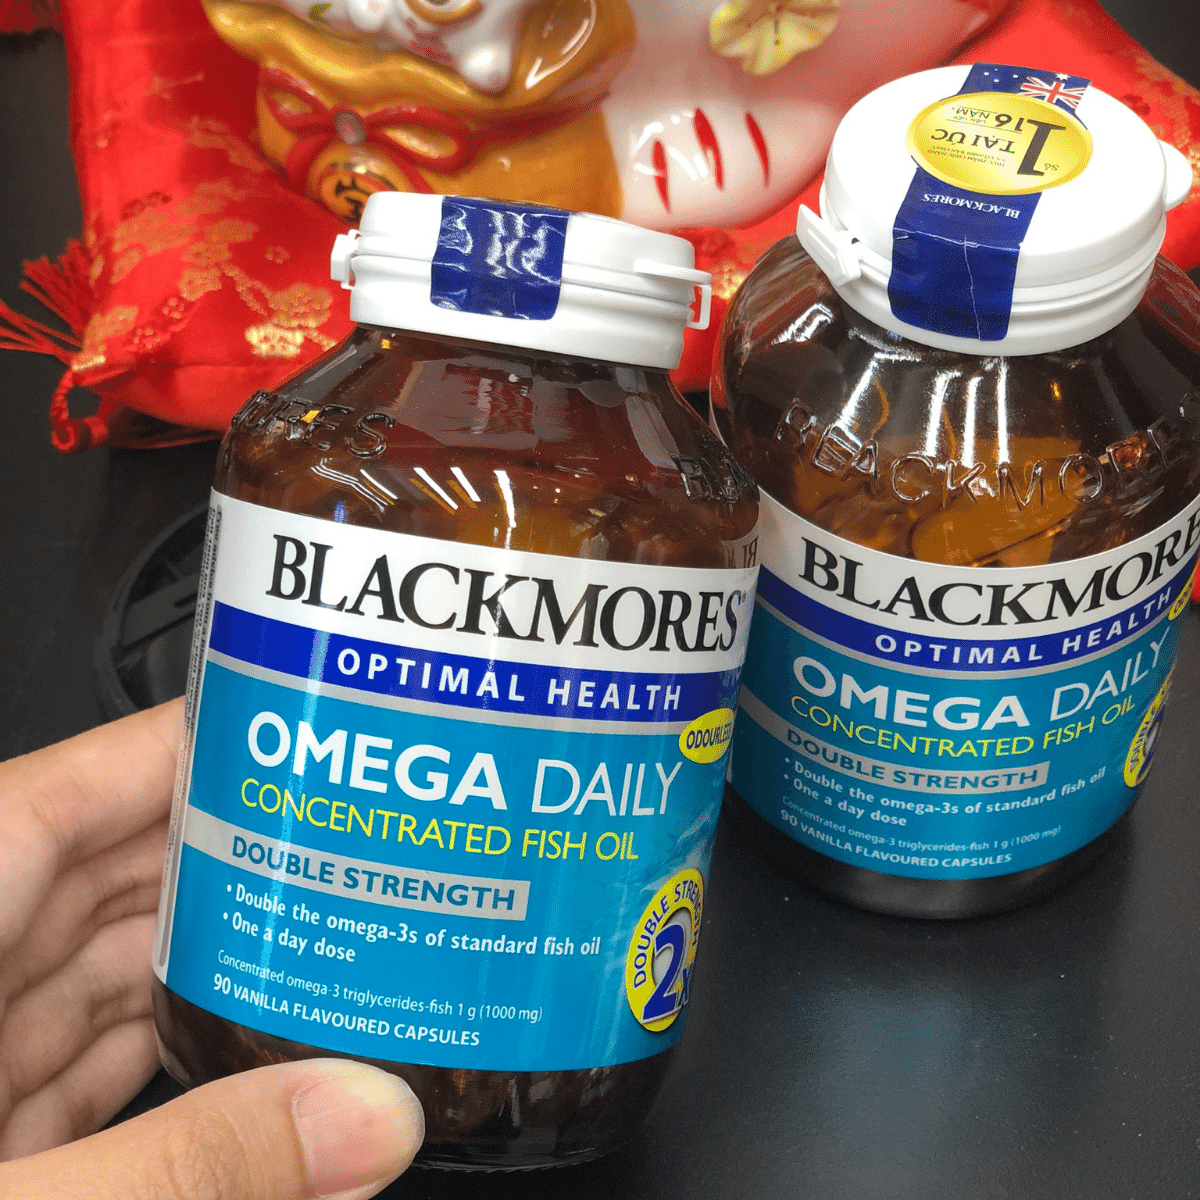 Blackmores-Omega Daily-Concentrated-fish-oil (2)